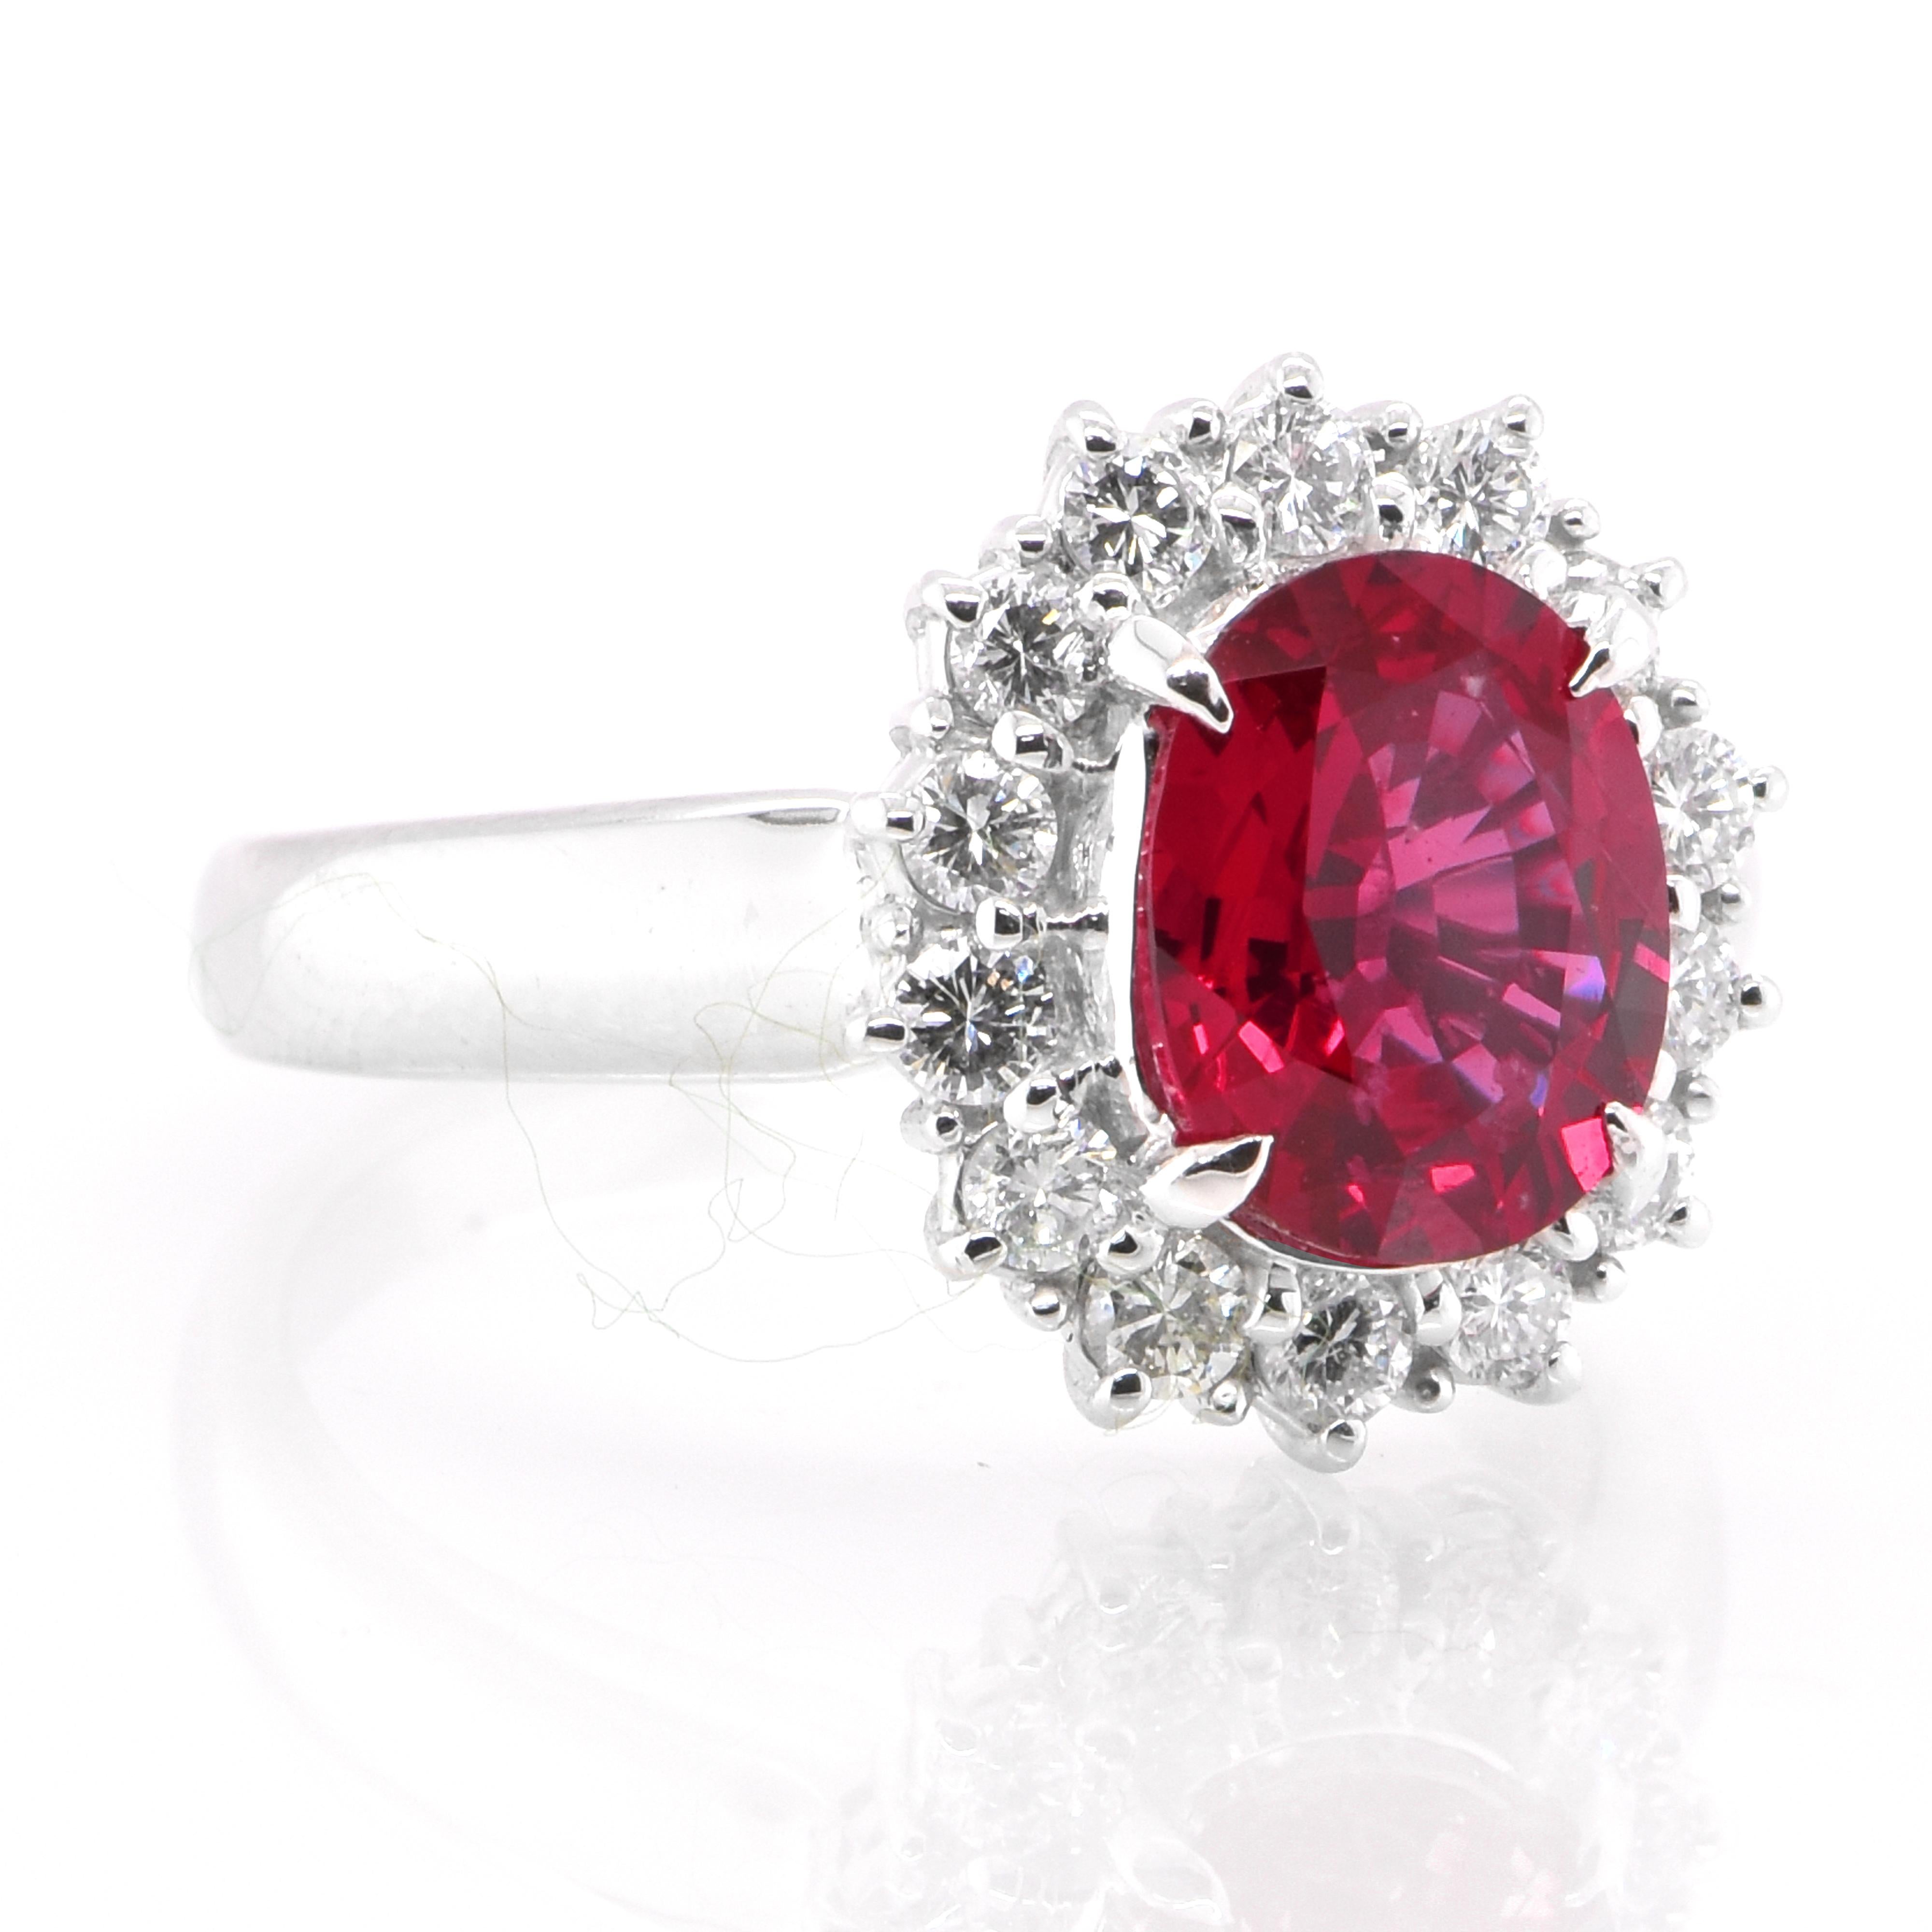 Modern GIA Certified 2.17 Carat Unheated, African Ruby & Diamond Ring Set in Platinum For Sale